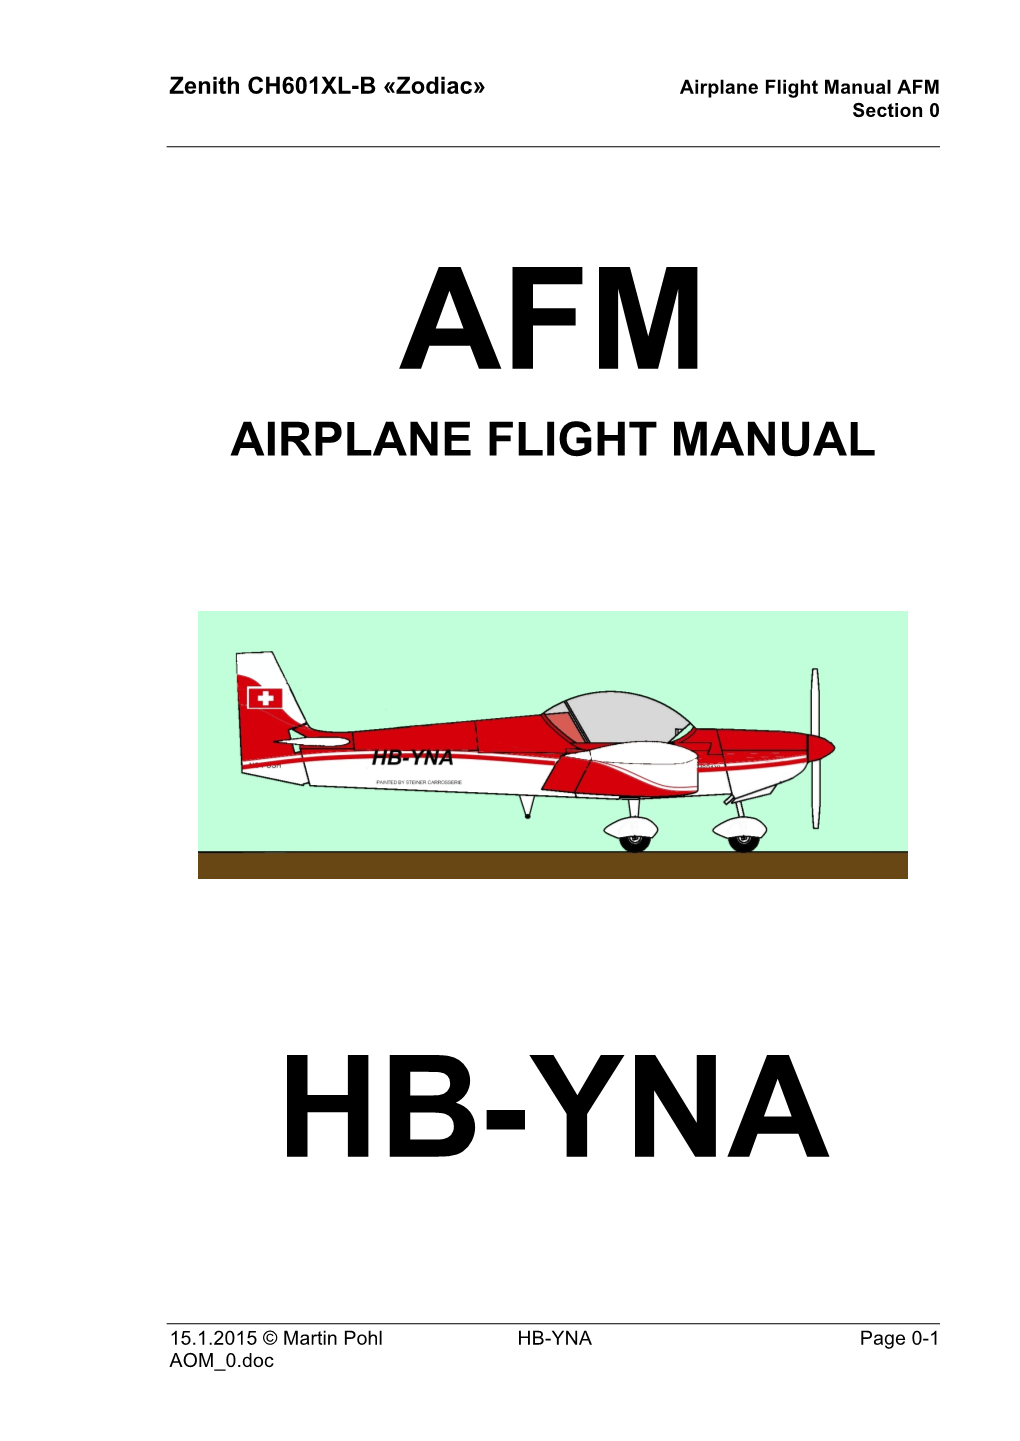 Airplane Flight Manual AFM Section 0